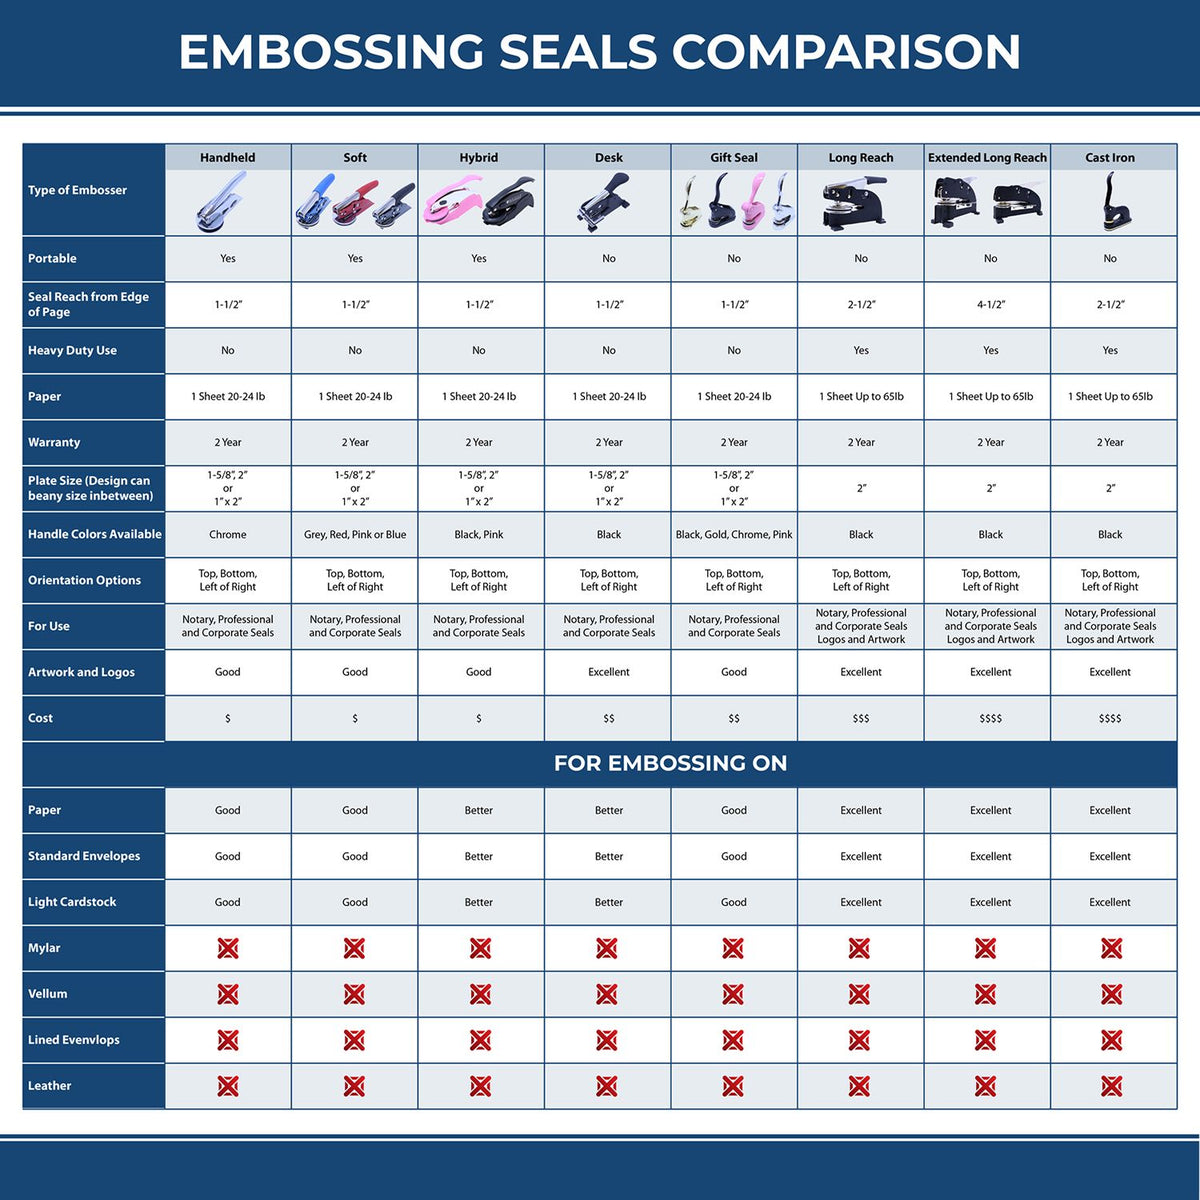 A comparison chart for the different types of mount models available for the Alabama Desk Surveyor Seal Embosser.